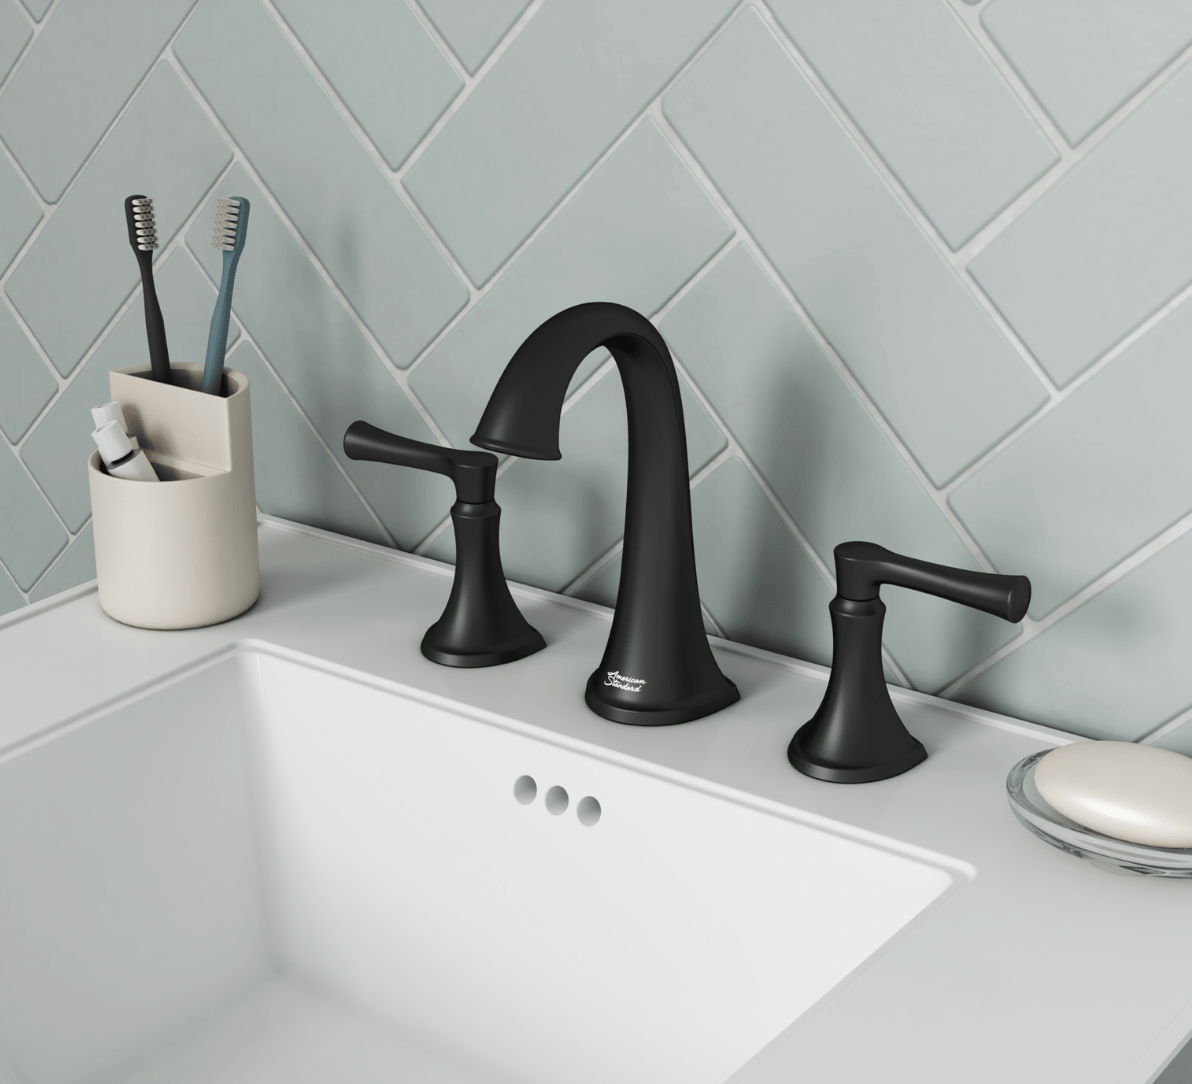 STEP 1 - Choose the perfect faucet for your space